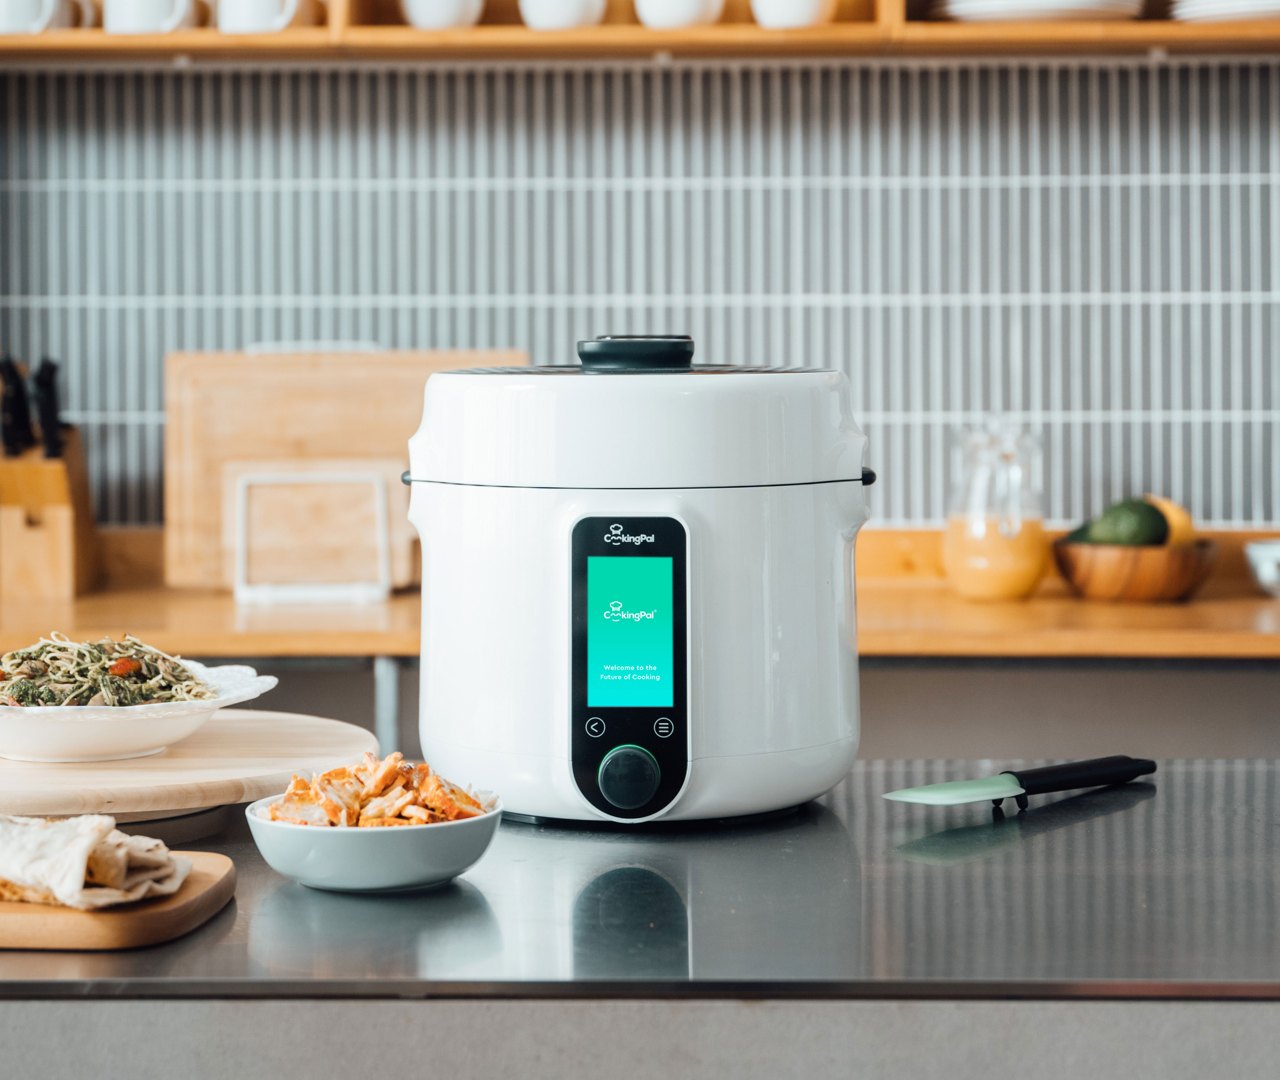 https://www.yankodesign.com/images/design_news/2023/04/this-multifunctional-smart-cooker-turns-you-into-a-kitchen-wiz-with-ease/kitchen_appliance_that_is_a_pressure_cooker_saucepan_and_air-fryer_1.jpg